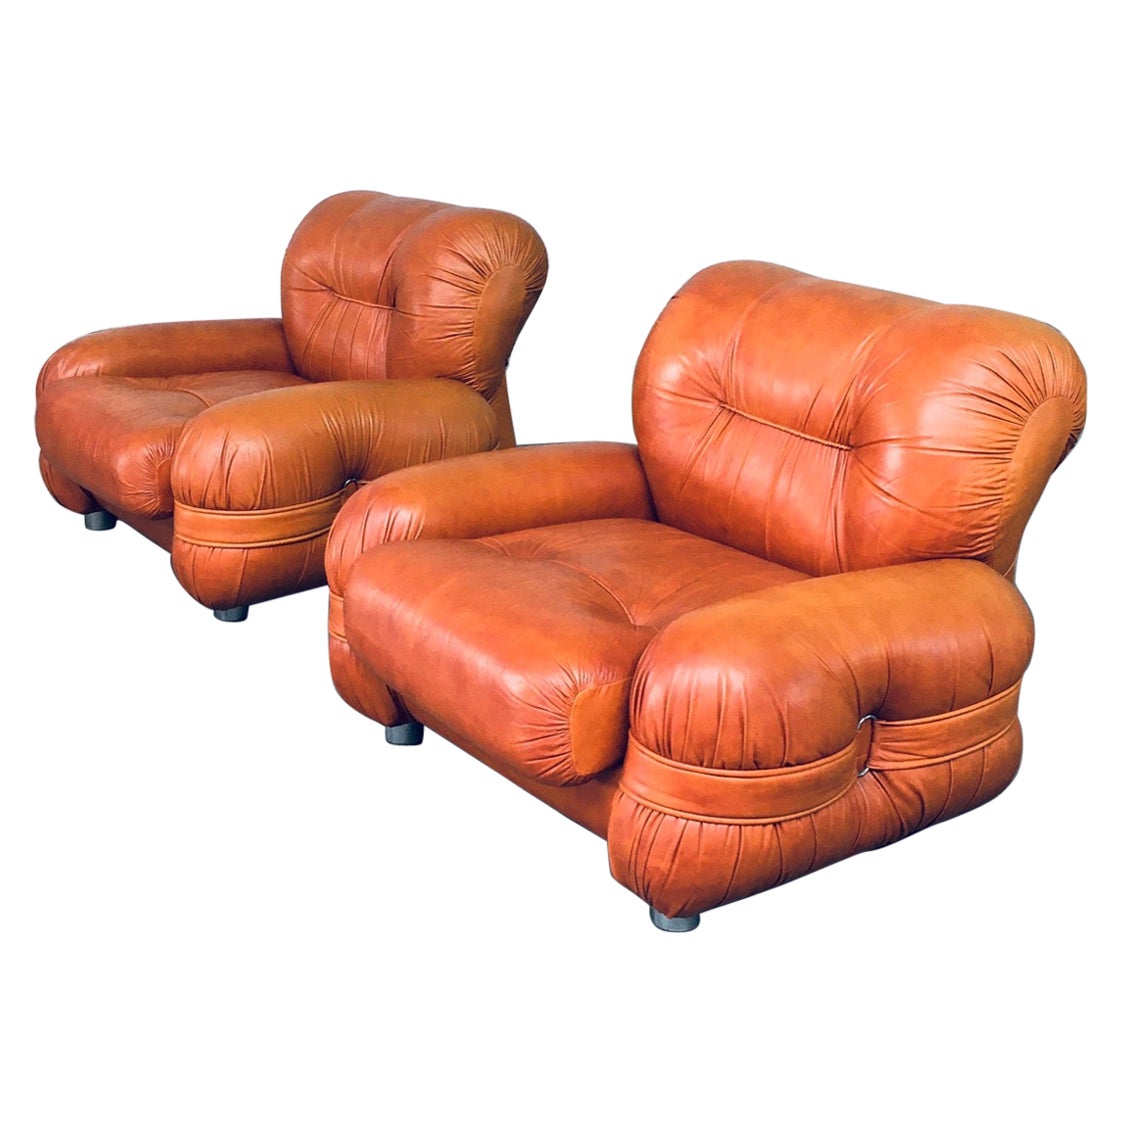 1970's Midcentury Modern Italian Design Leather Lounge Chair Set For Sale